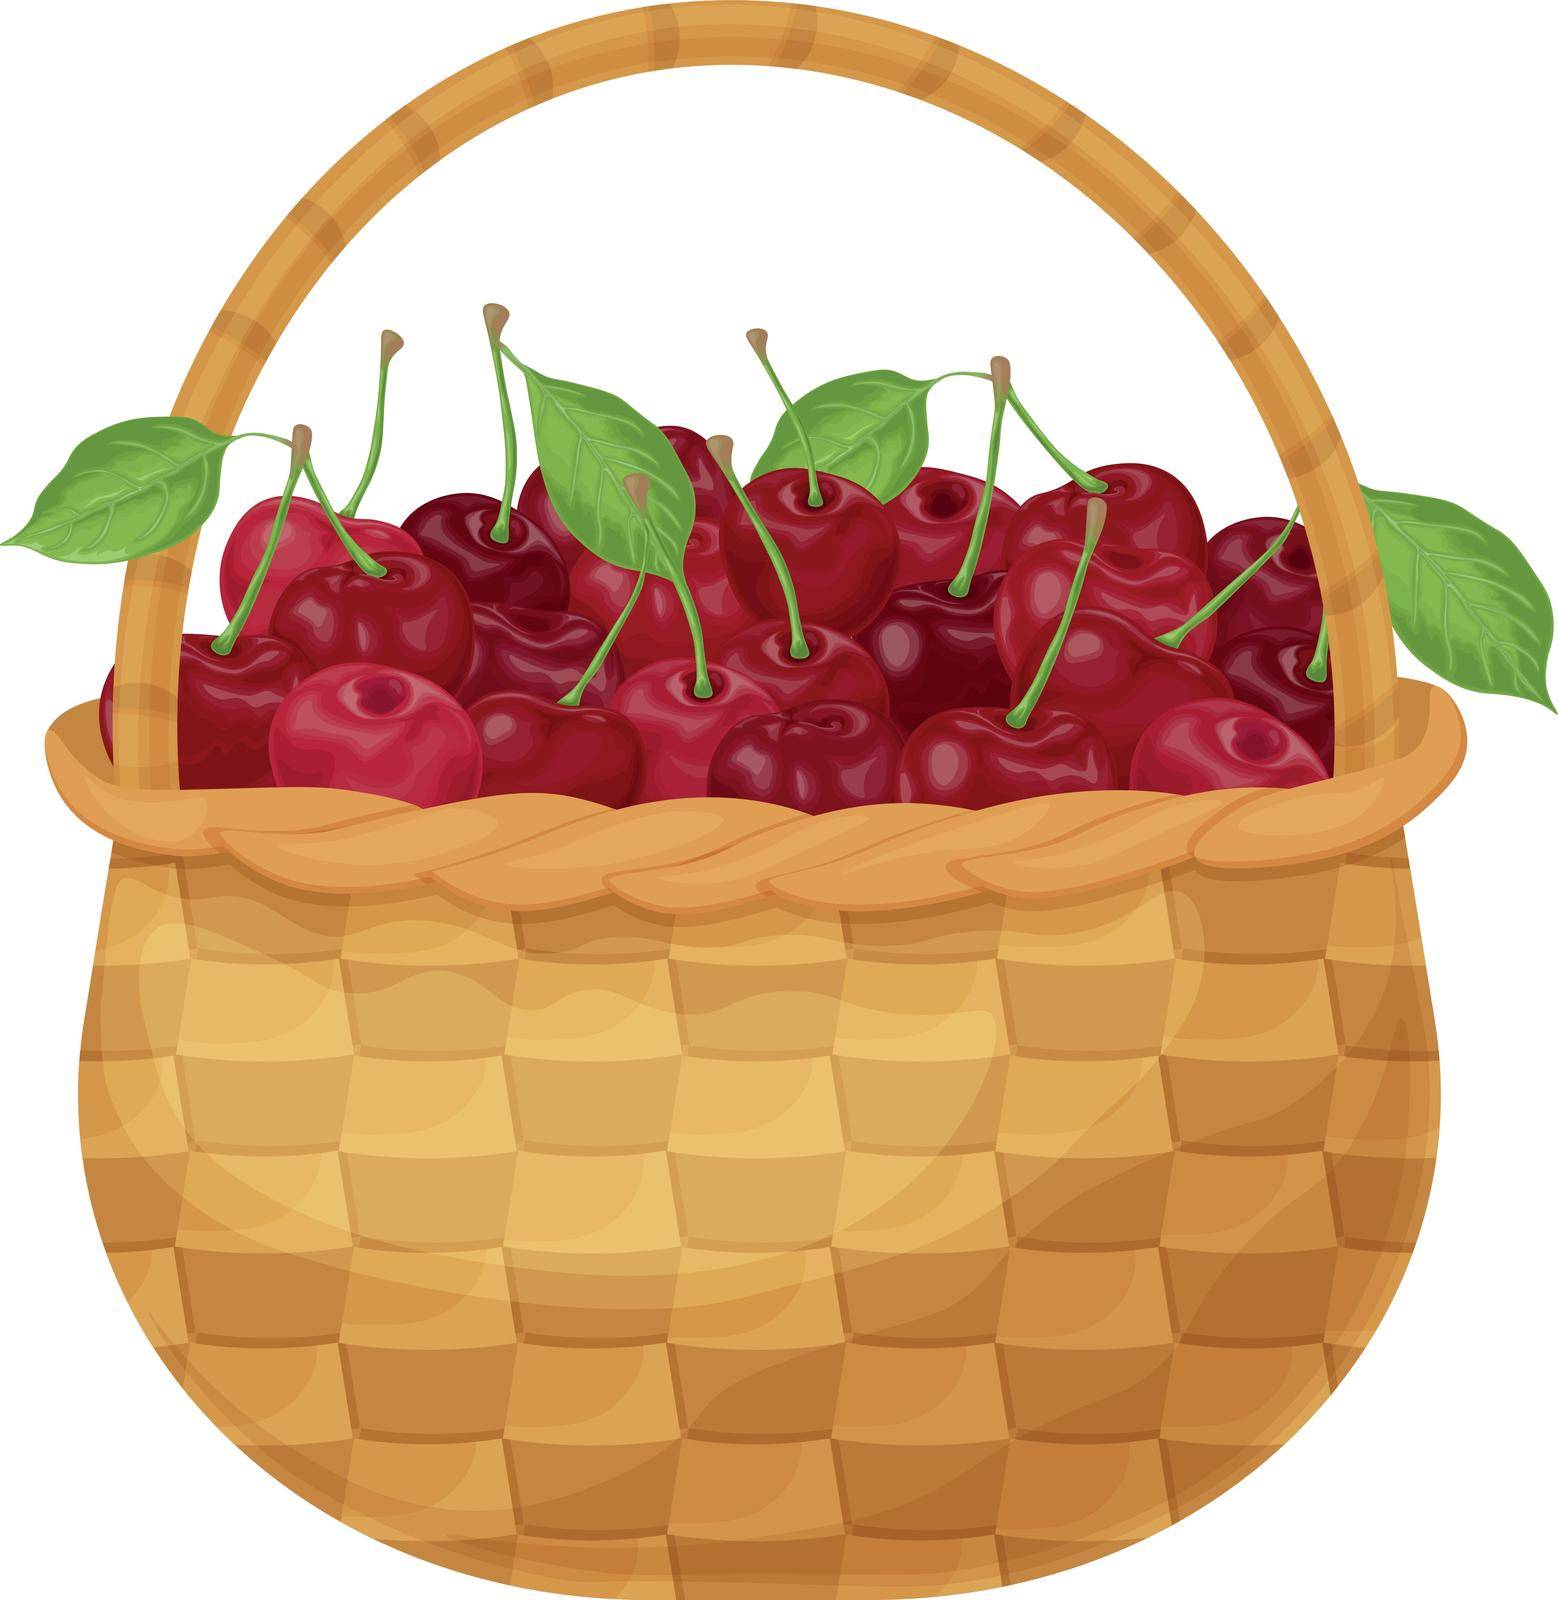 Cherry. Ripe cherries in a wicker basket. Basket with cherries. Basket with ripe berries. Vitamin products. Vector illustration isolated on a white background by NastyaN